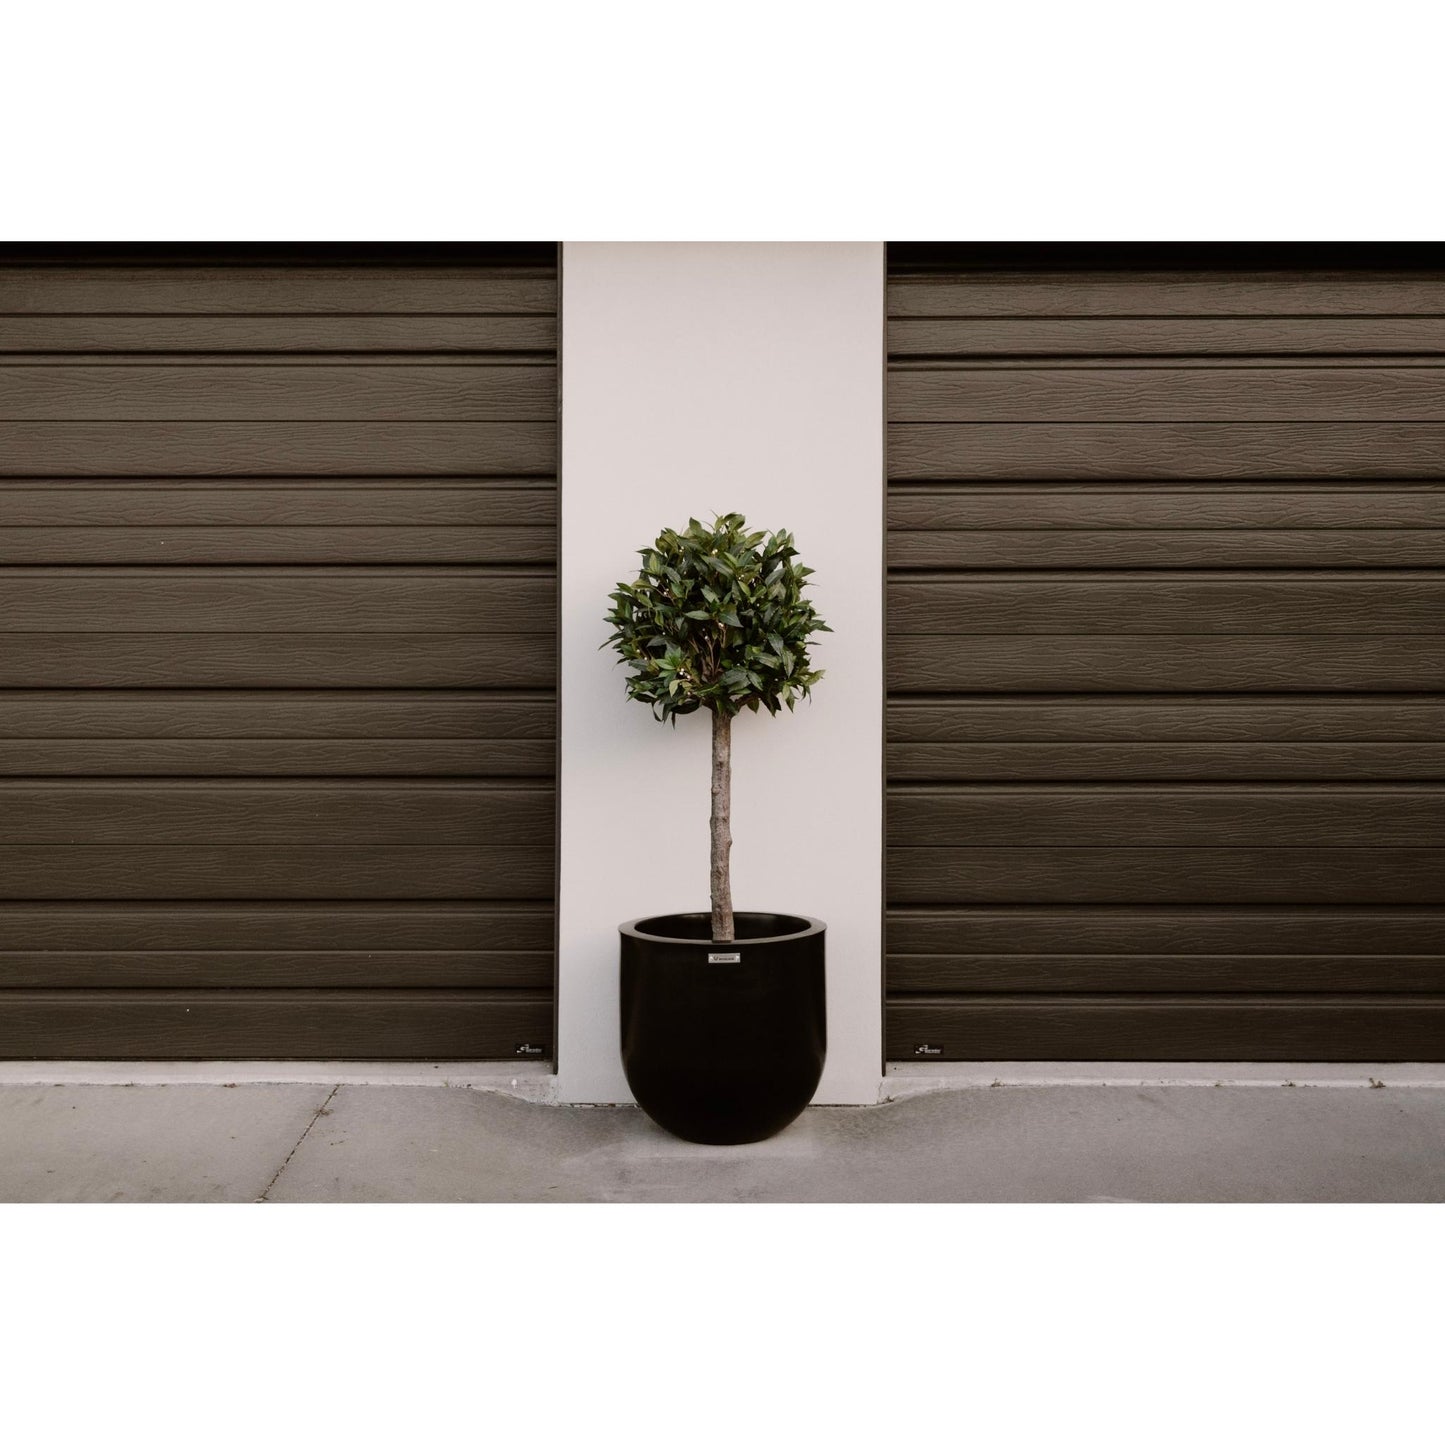 A black Modscene planter pot in front of a house. The planter pot is planted with a Bay Tree.